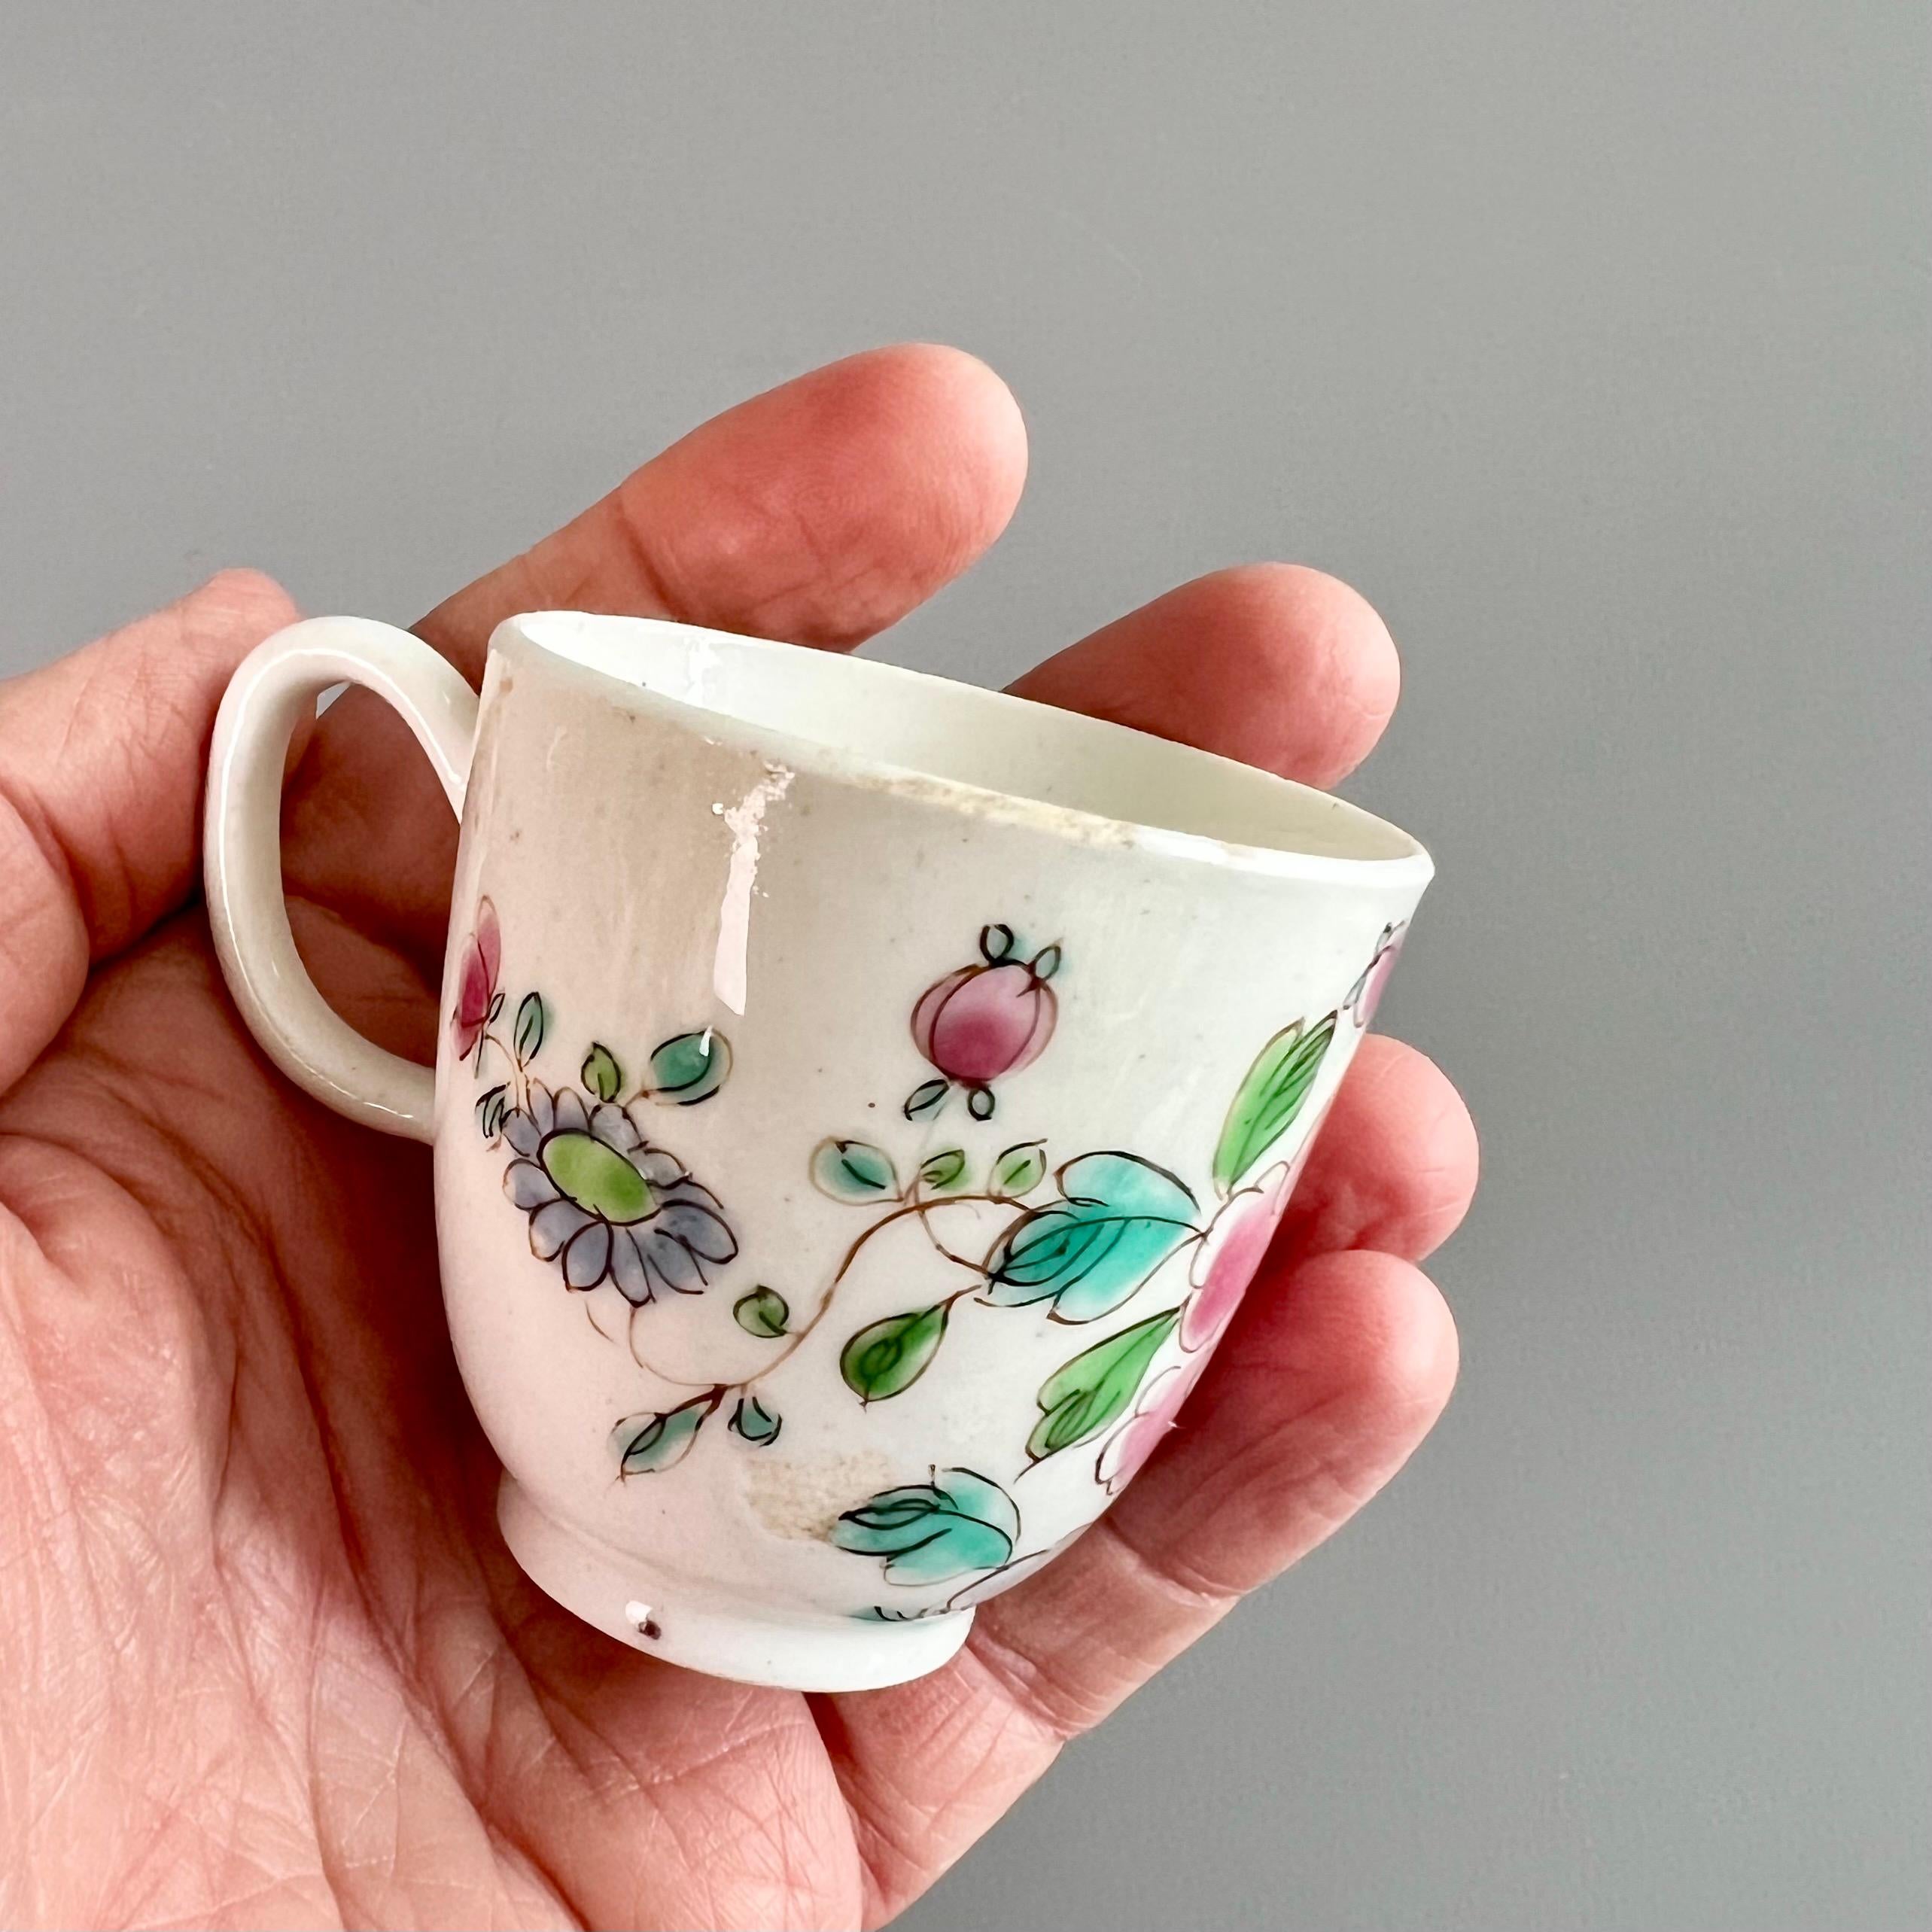 This is a very charming orphaned coffee cup made by the Bow Porcelain factory in about 1755. The cup is decorated in a Chinese 